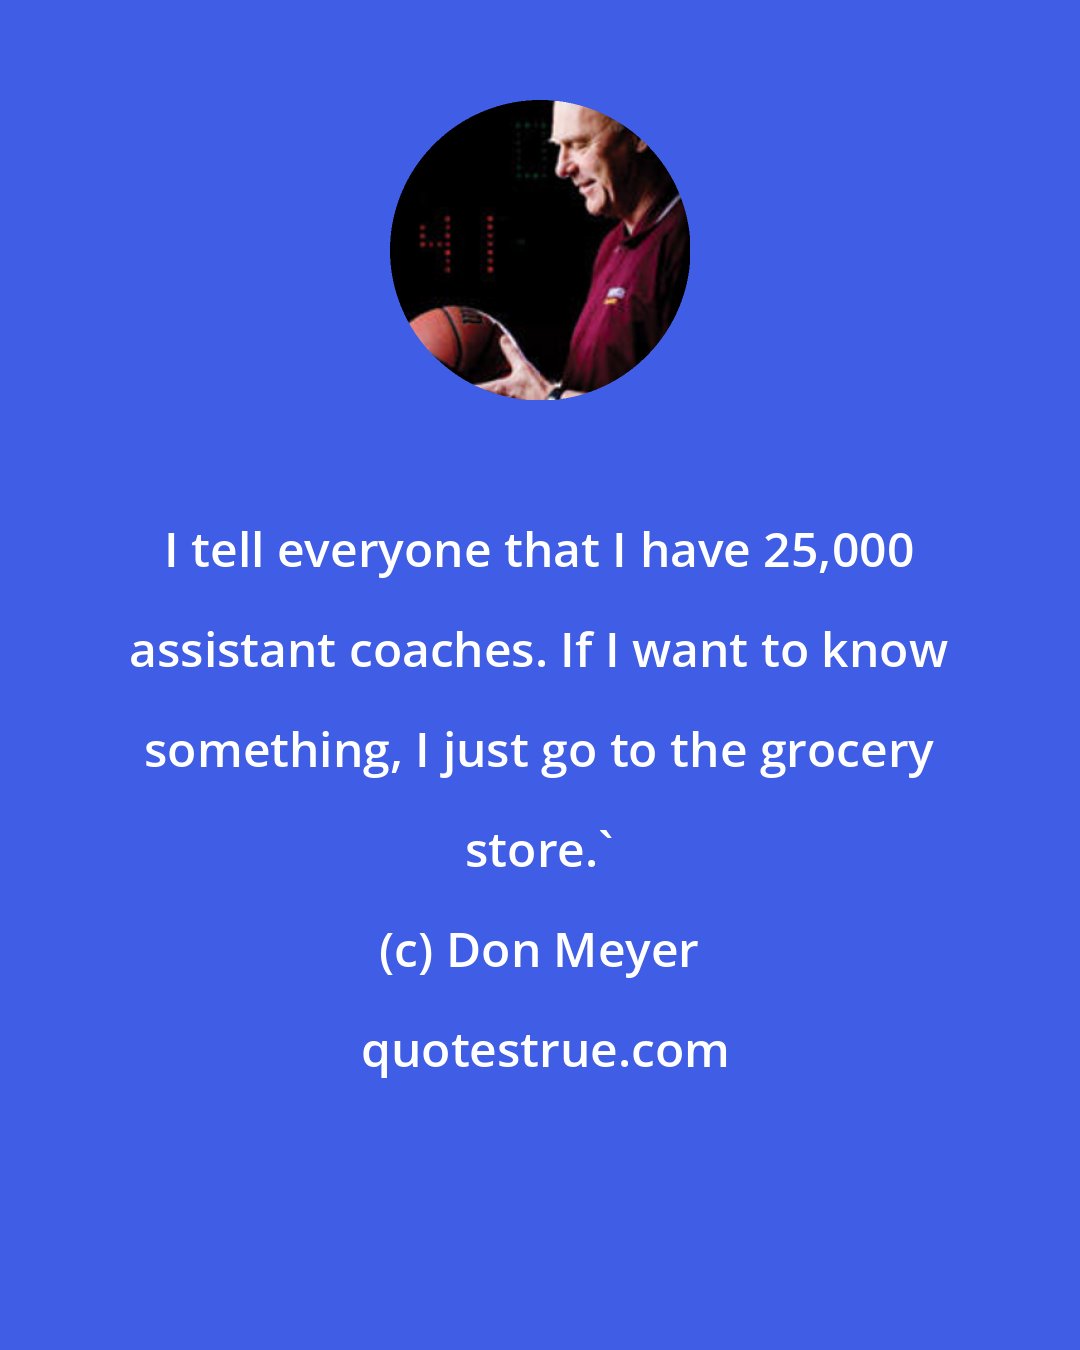 Don Meyer: I tell everyone that I have 25,000 assistant coaches. If I want to know something, I just go to the grocery store.'